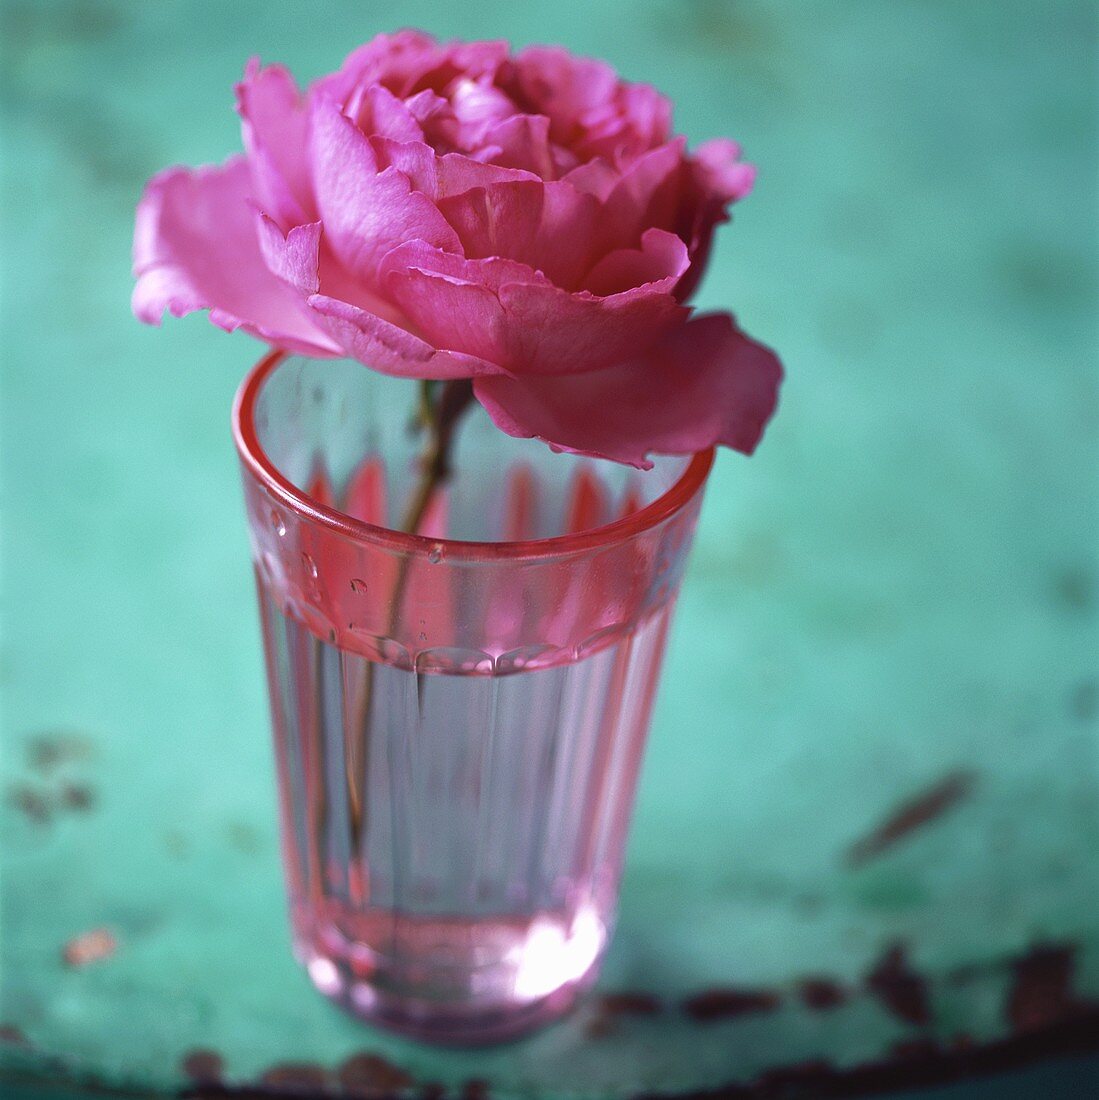 Pink rose in a pink glass